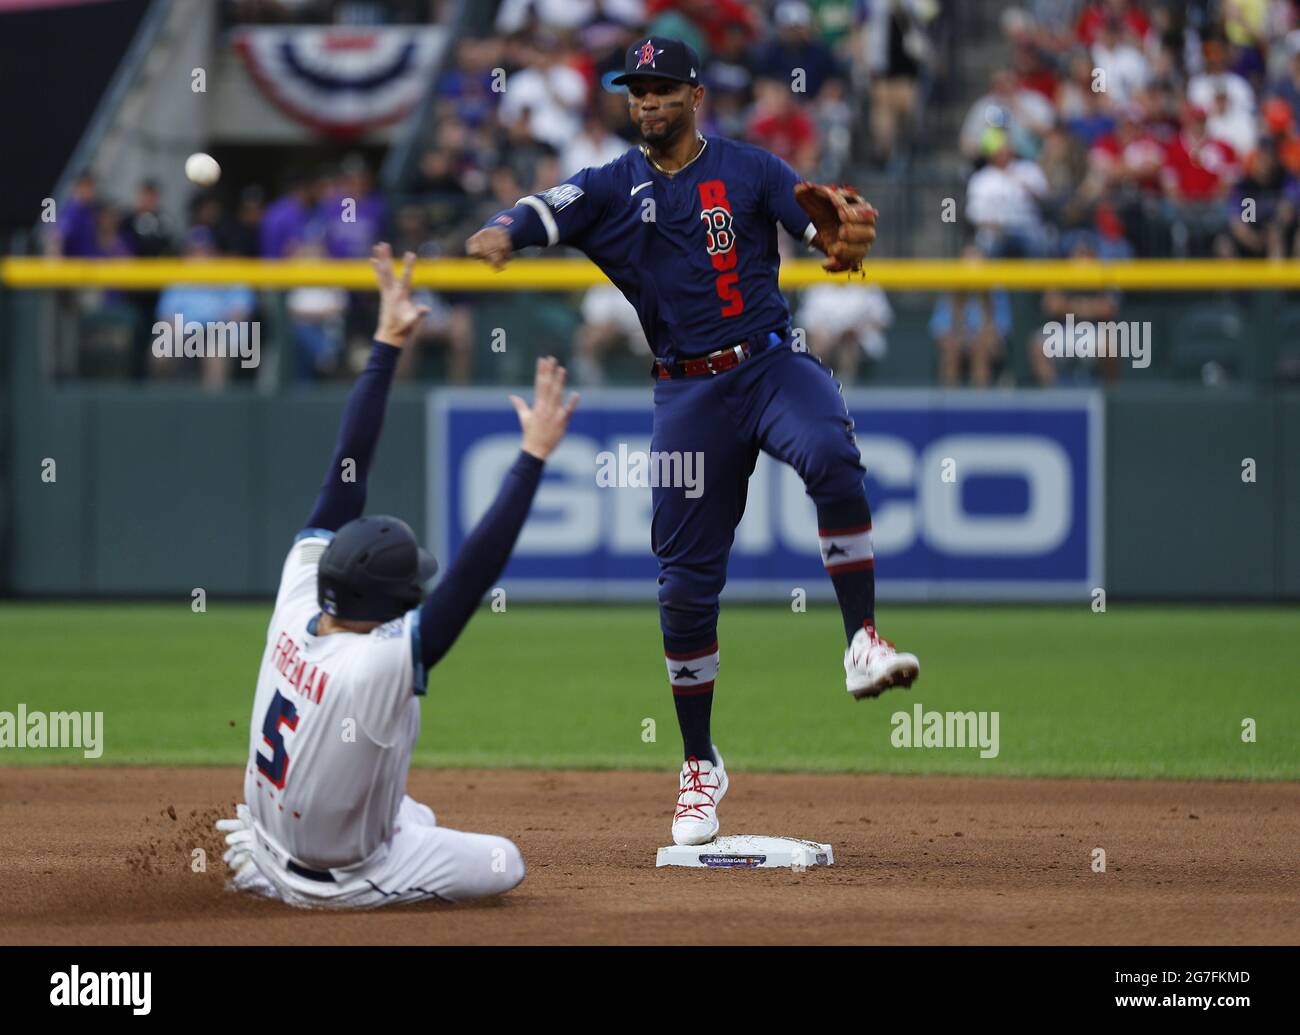 Denver, United States. 13th July, 2021. Boston Red Sox shortstop Xander Bogaerts leaps in the air to avoid a slide by Atlanta Braves first baseman Freddie Freeman in the fourth inning during the 2021 MLB All-Star Game at Coors Field in Denver, Colorado, on Tuesday, July 13, 2021. Photo by Bob Strong/UPI Credit: UPI/Alamy Live News Stock Photo